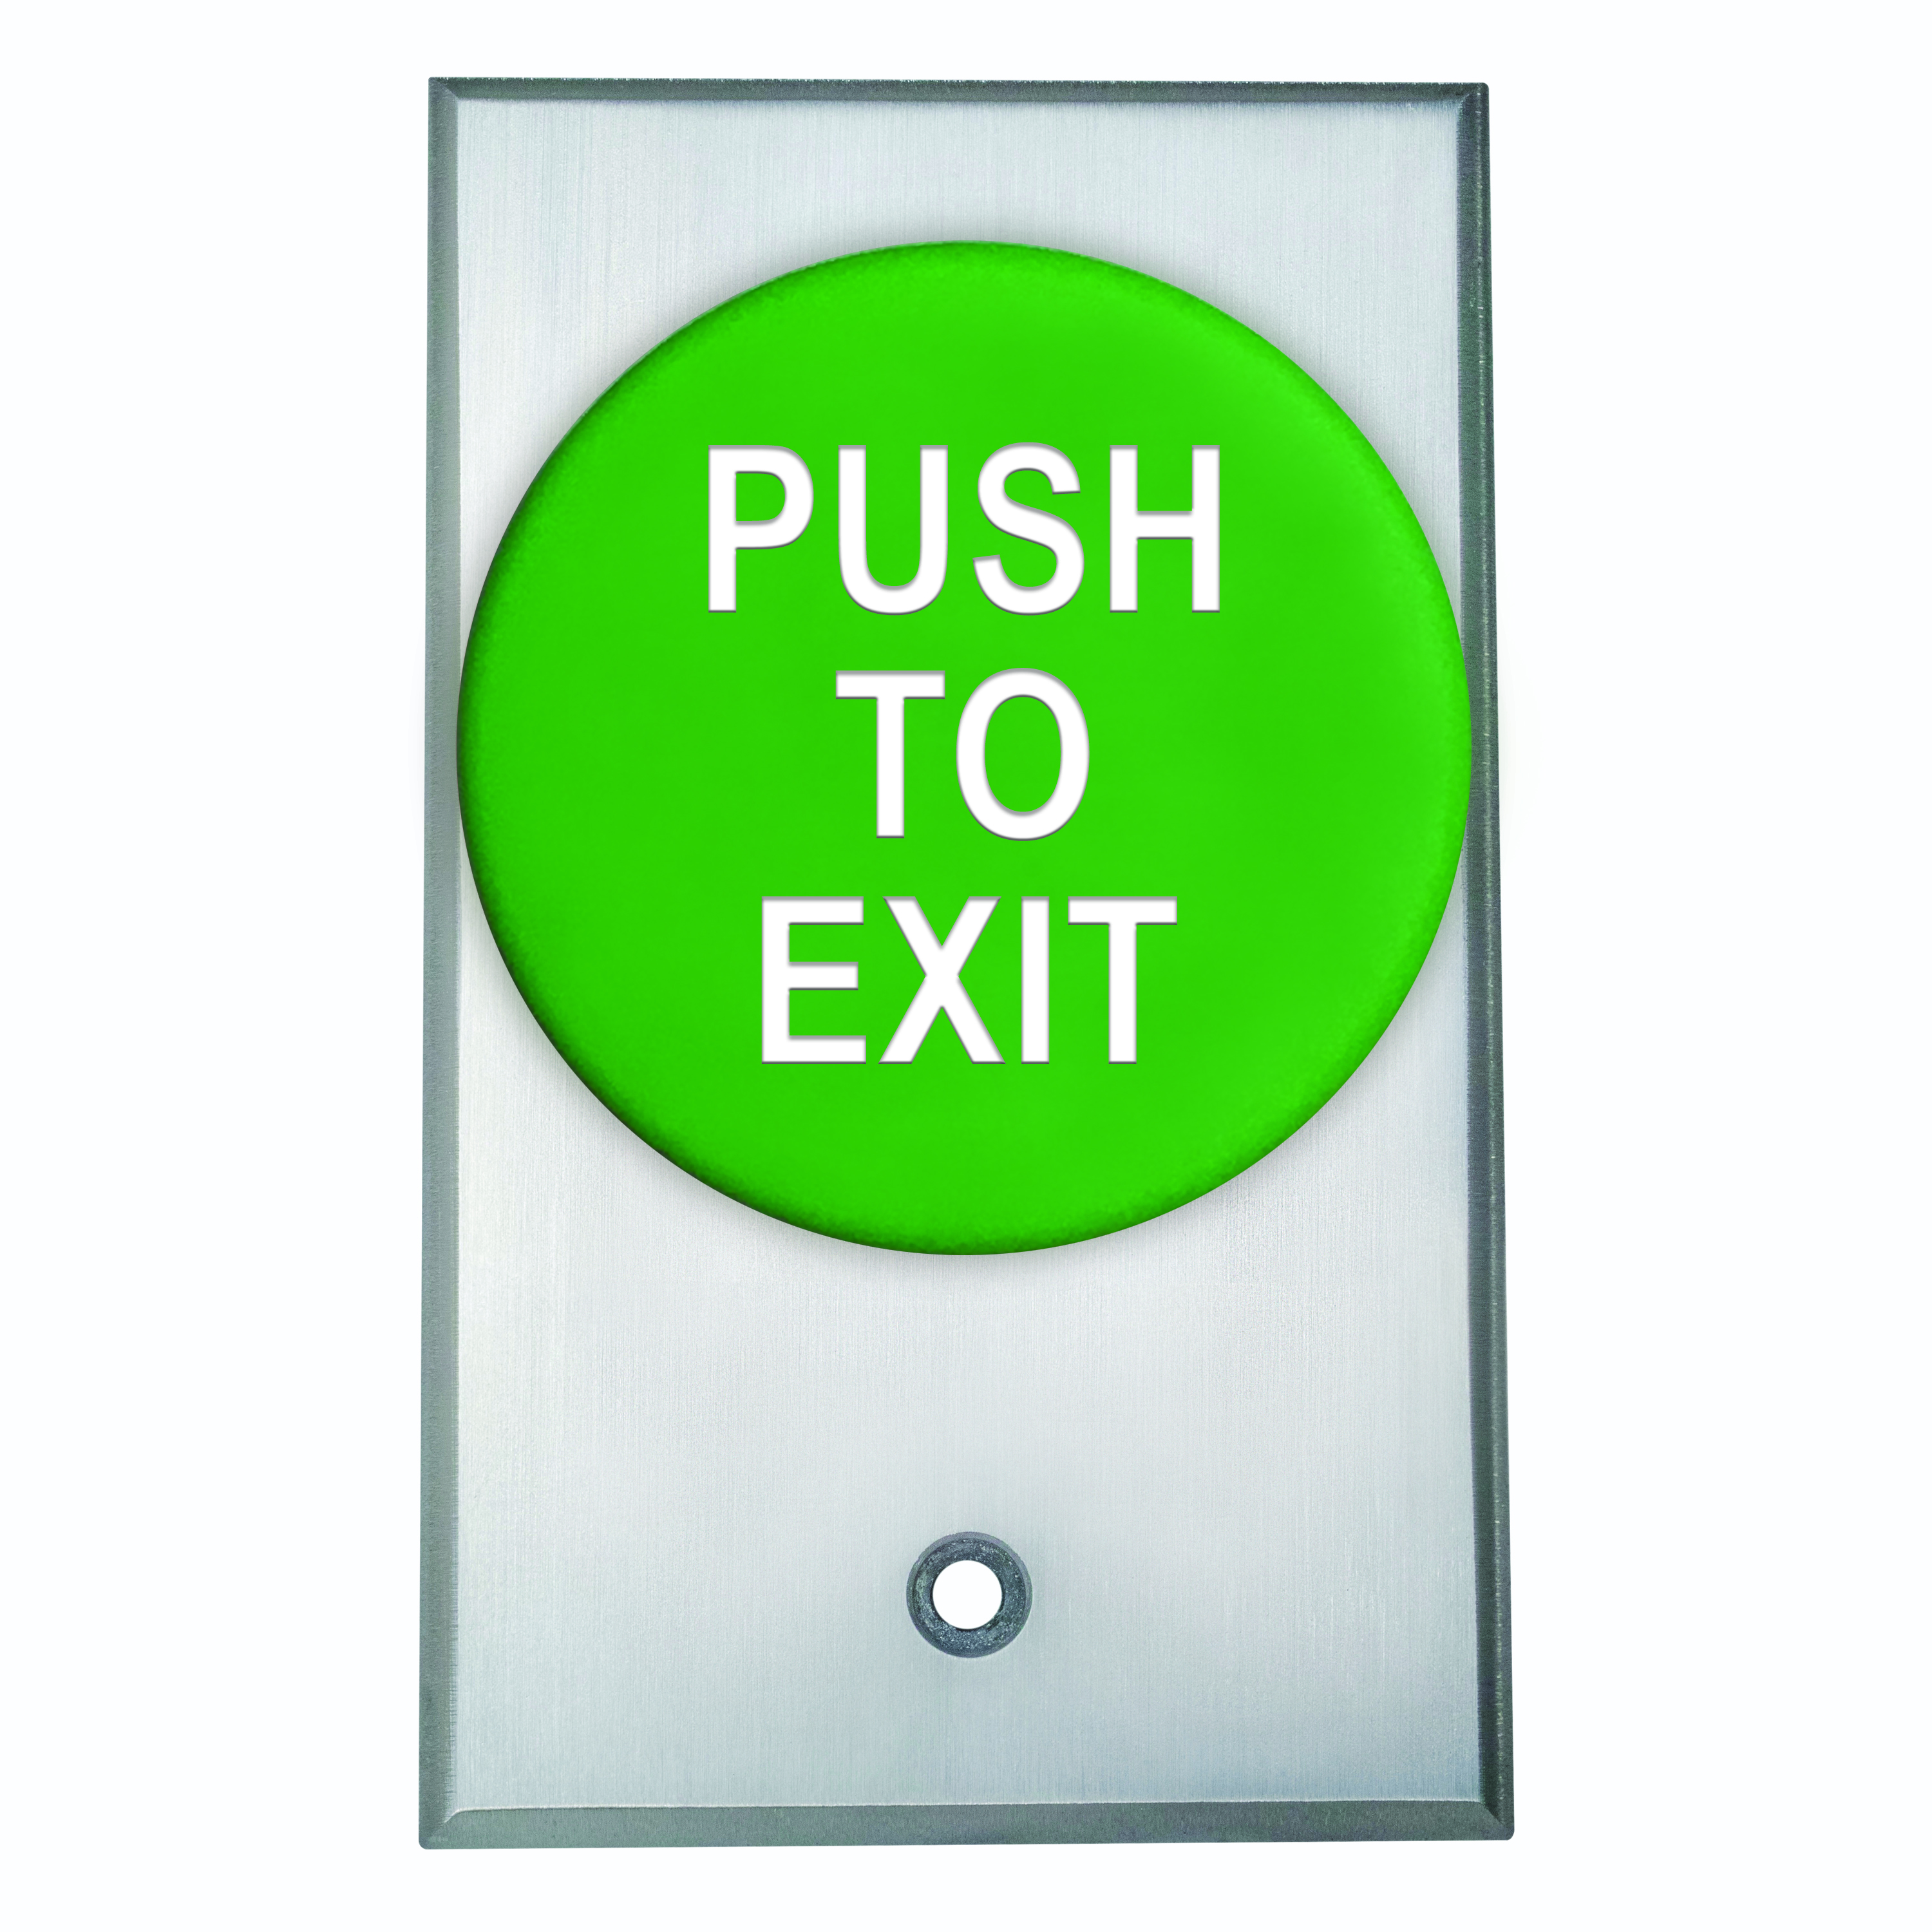 CM-300/310 Series: Rectangular LED Illuminated Switch - Push / Exit Buttons - Activation